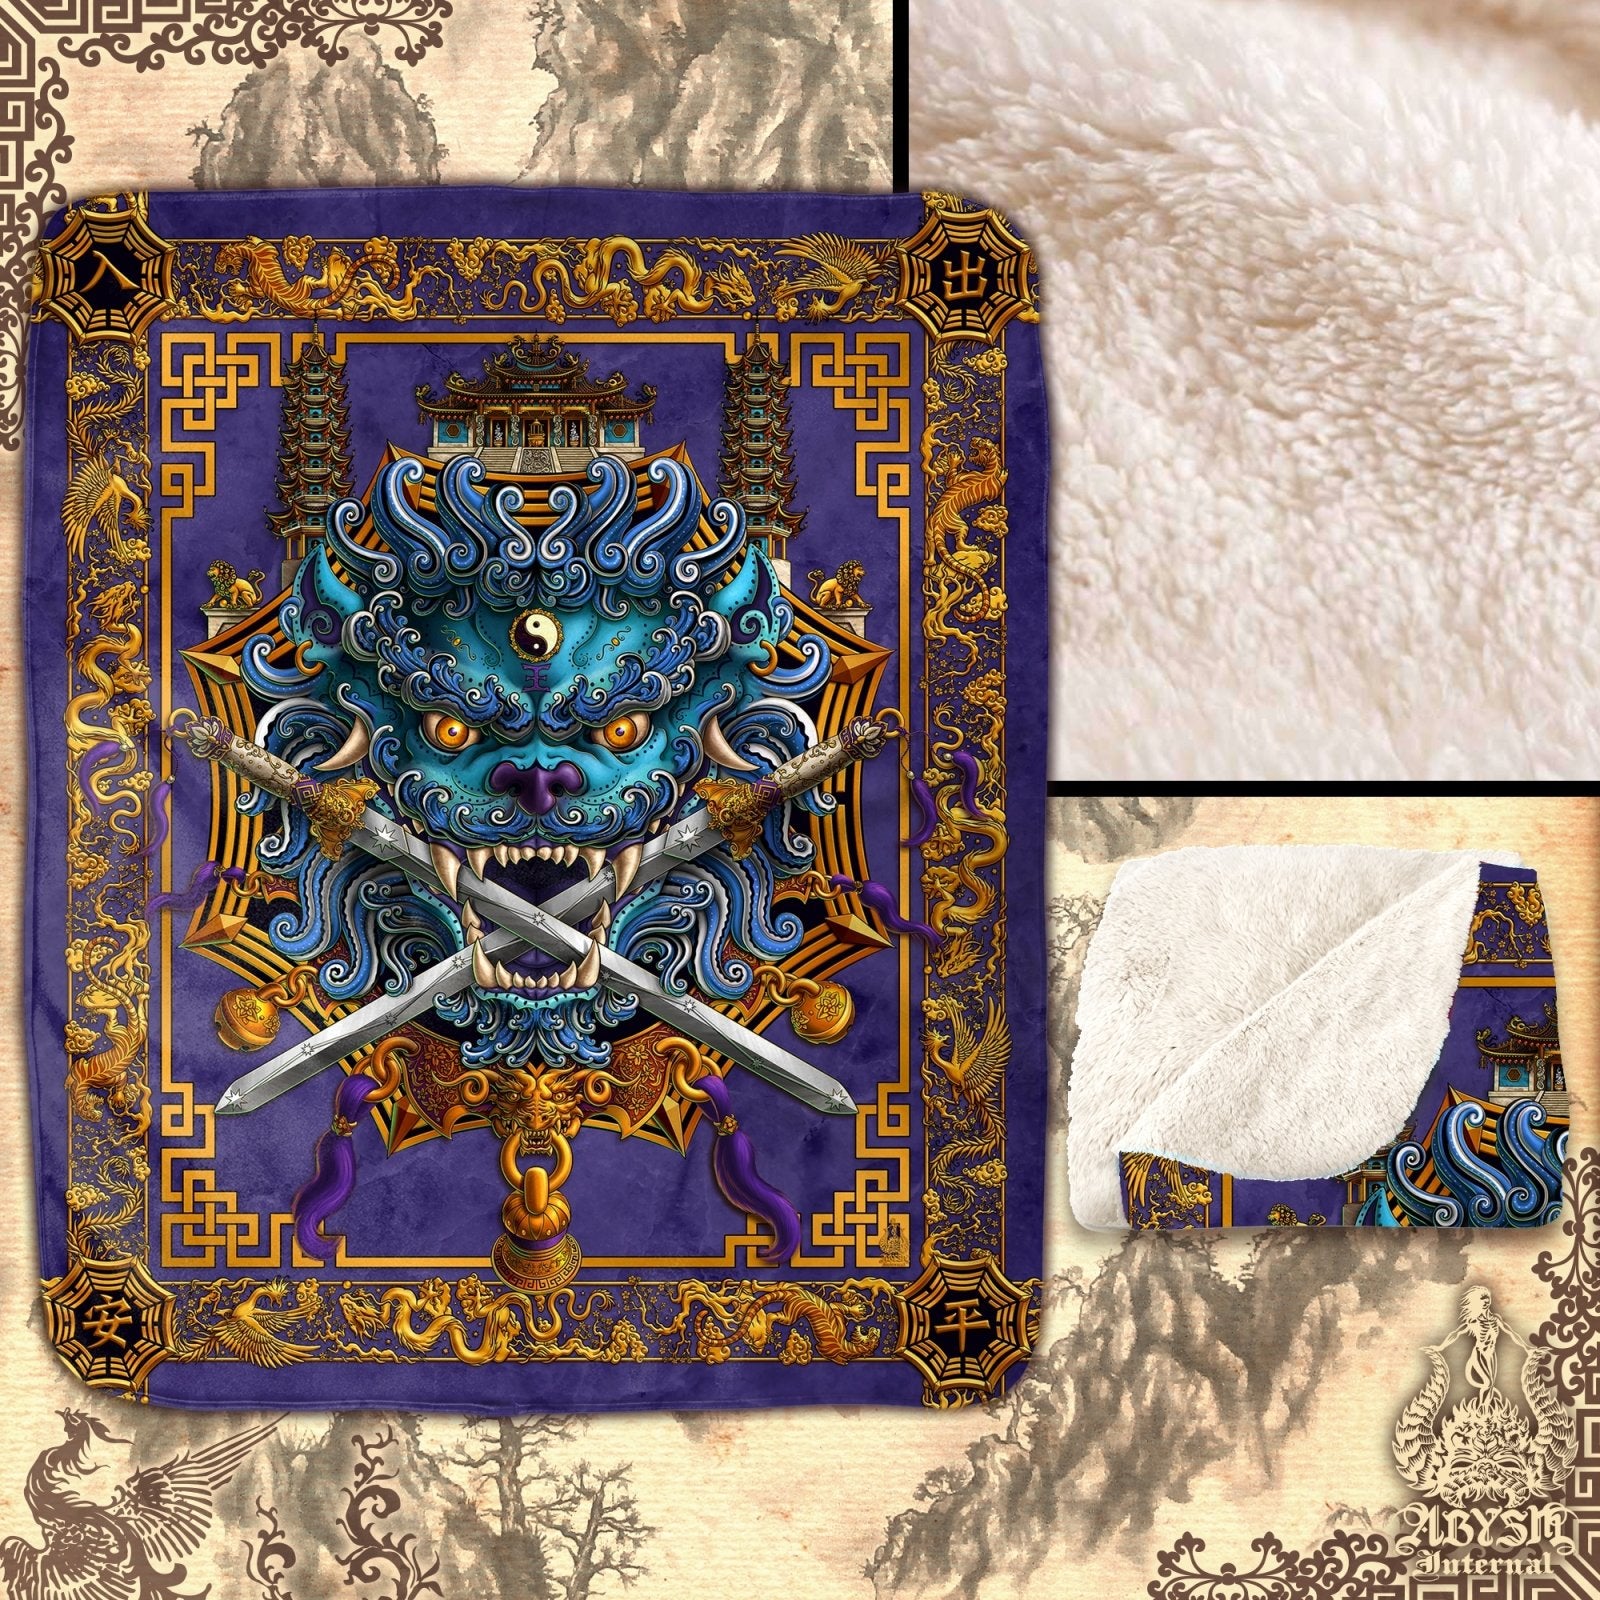 Asian Lion Throw Fleece Blanket, Taiwan Sword Lion, Chinese Art, Gamer Room Decor, Eclectic and Funky Gift - Cyan & Purple - Abysm Internal